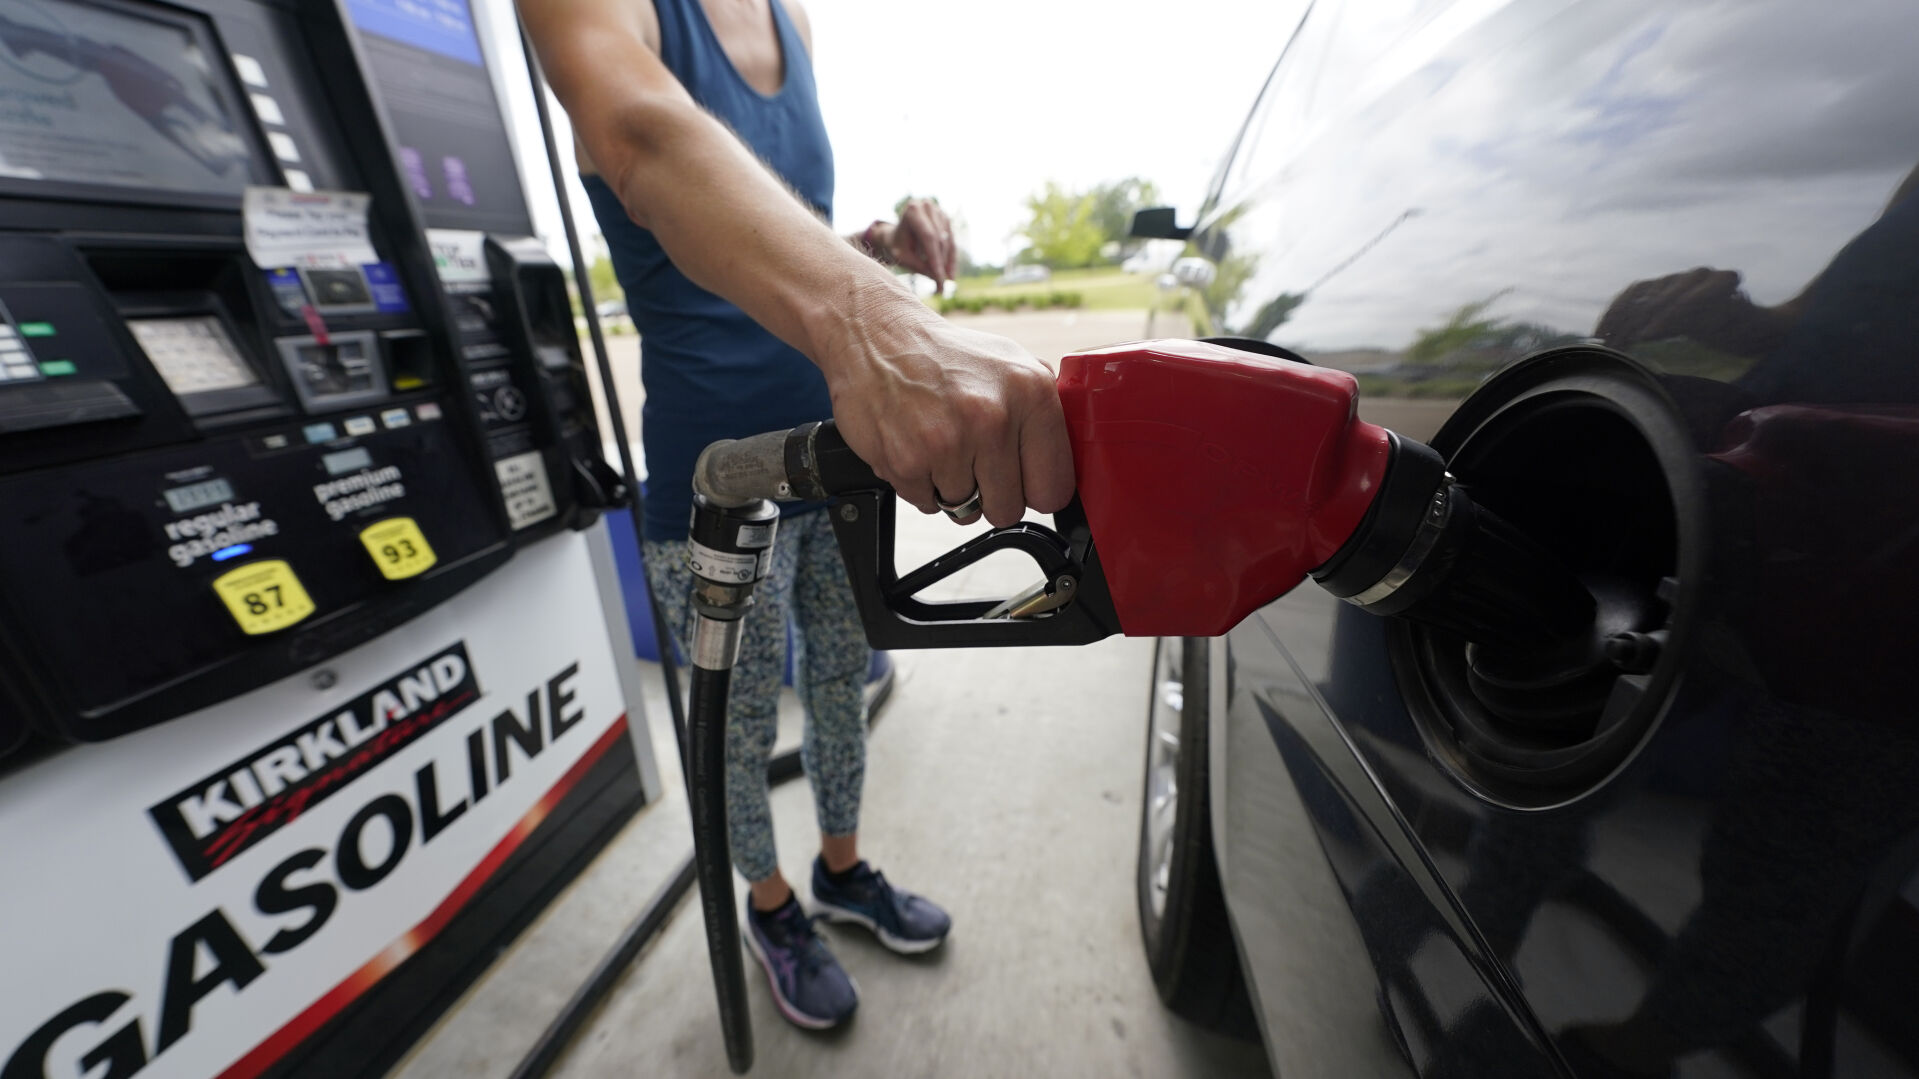 <p>FILE - A customer readies to pump gas at this Ridgeland, Miss., Costco, Tuesday, May 24, 2022. The Labor Department is expected to report consumer prices on Thursday, Nov. 10. (AP Photo/Rogelio V. Solis, File)</p>   PHOTO CREDIT: Rogelio V. Solis - staff, AP